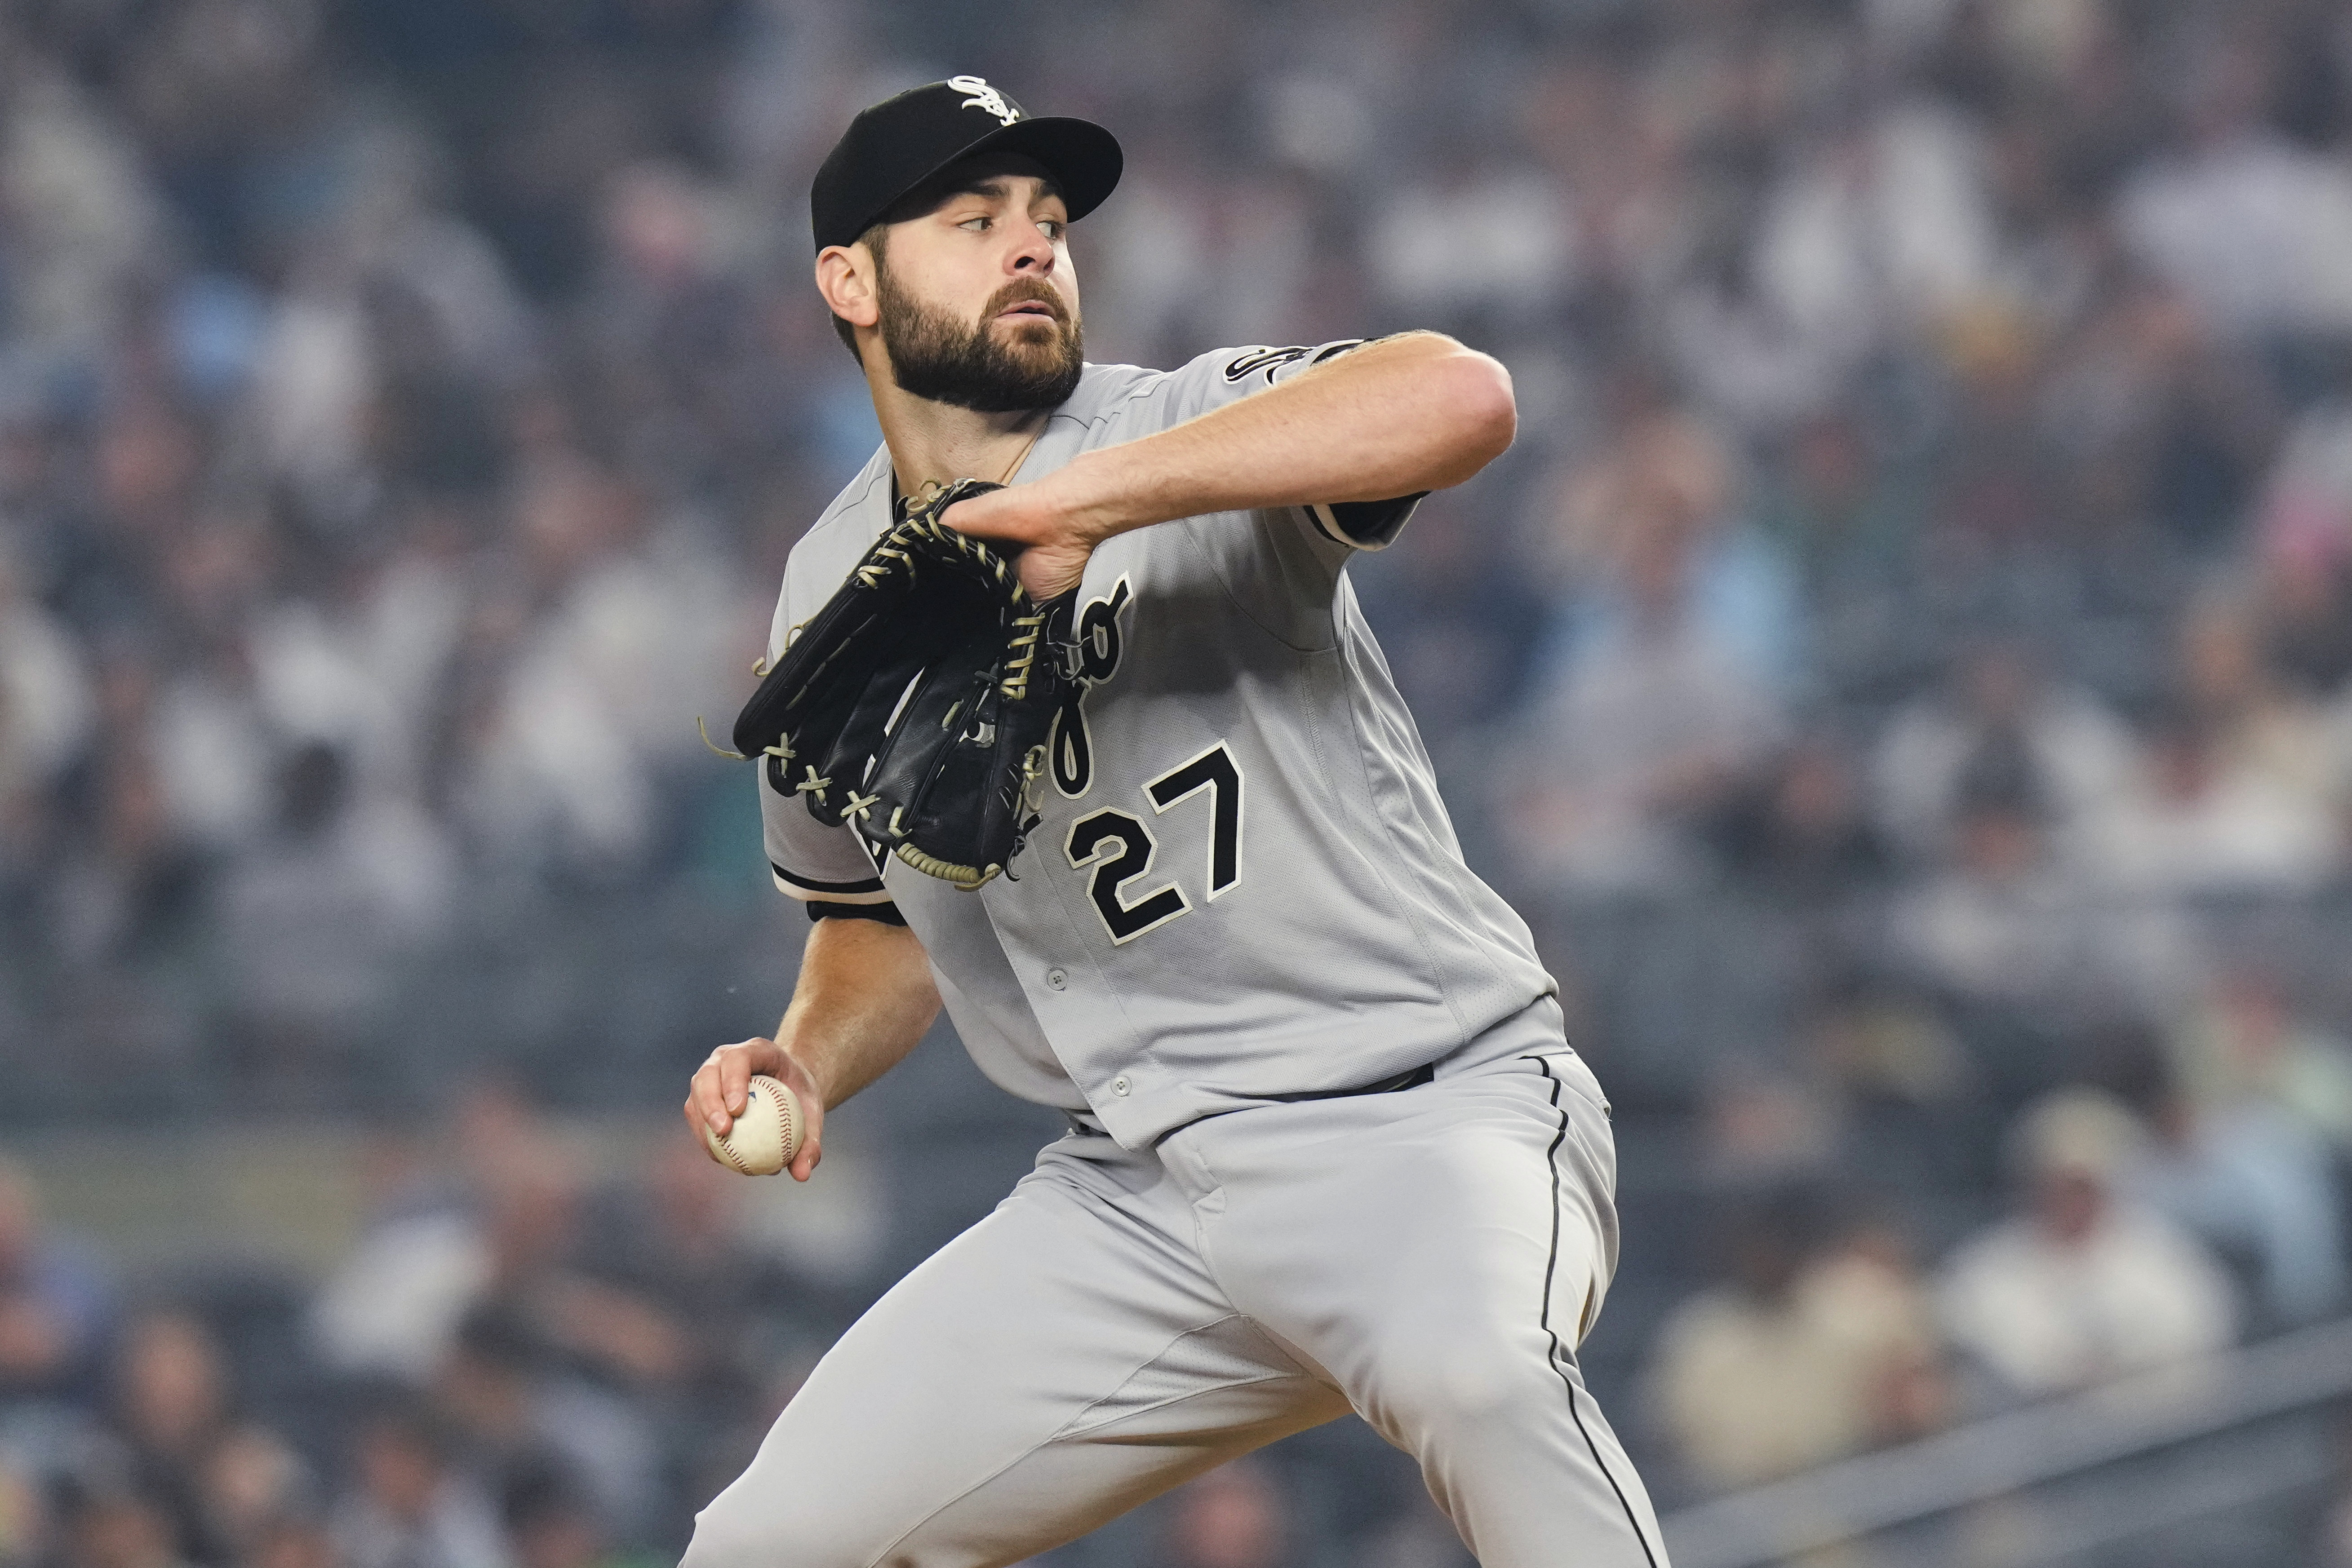 Lucas Giolito working on no-hitter against Yankees through six innings